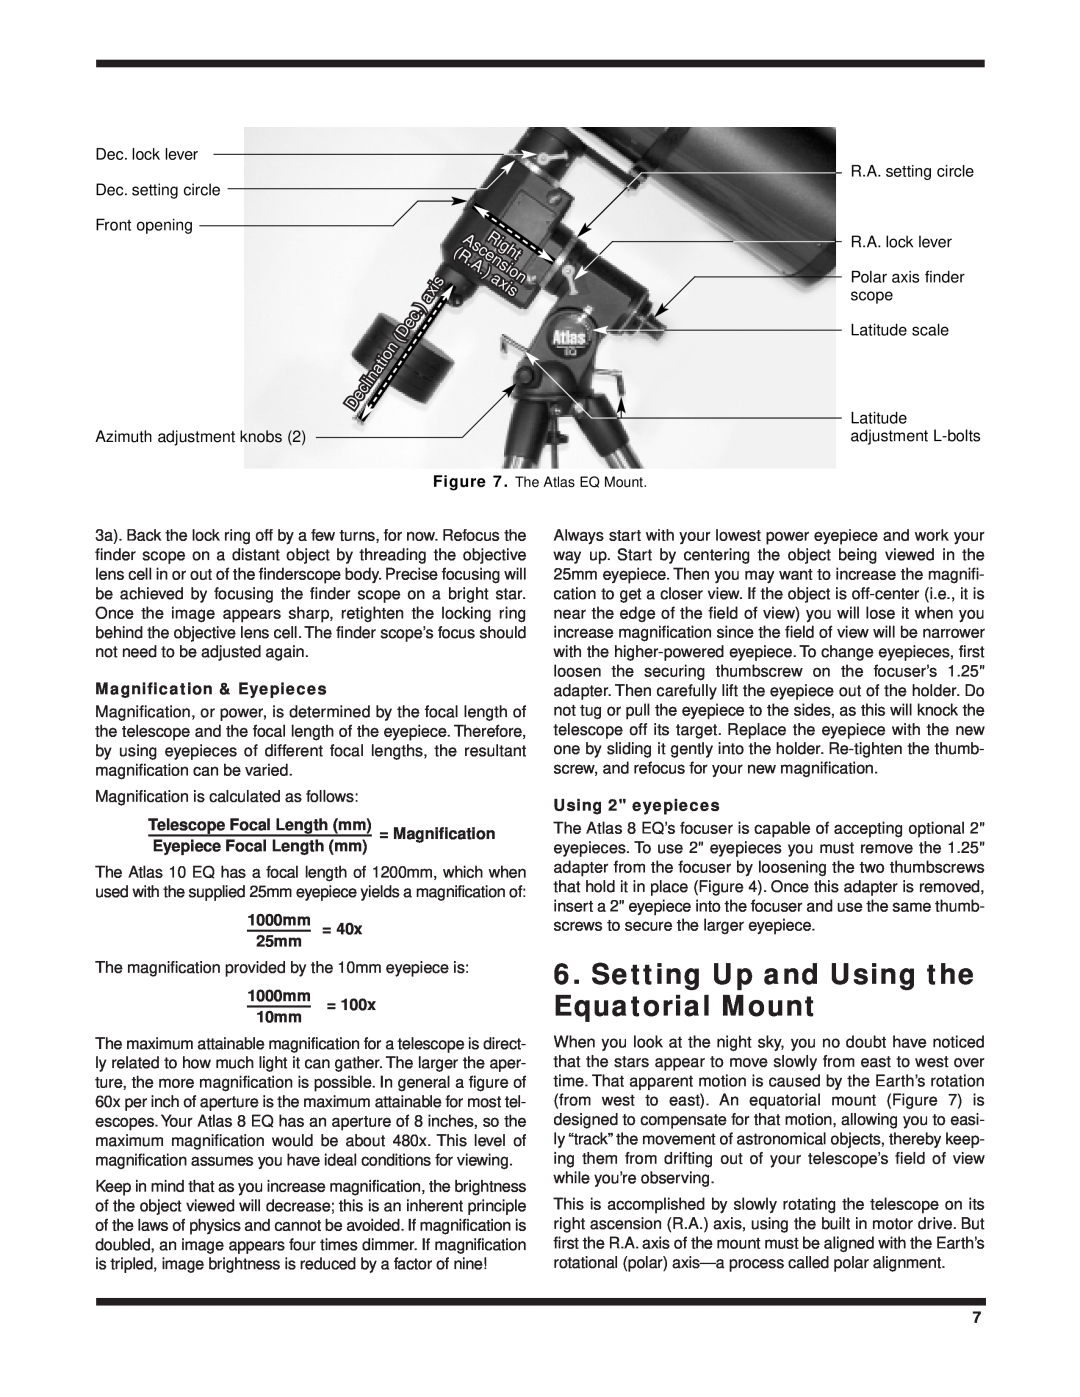 Orion 8 EQ instruction manual Setting Up and Using the, Equatorial Mount 